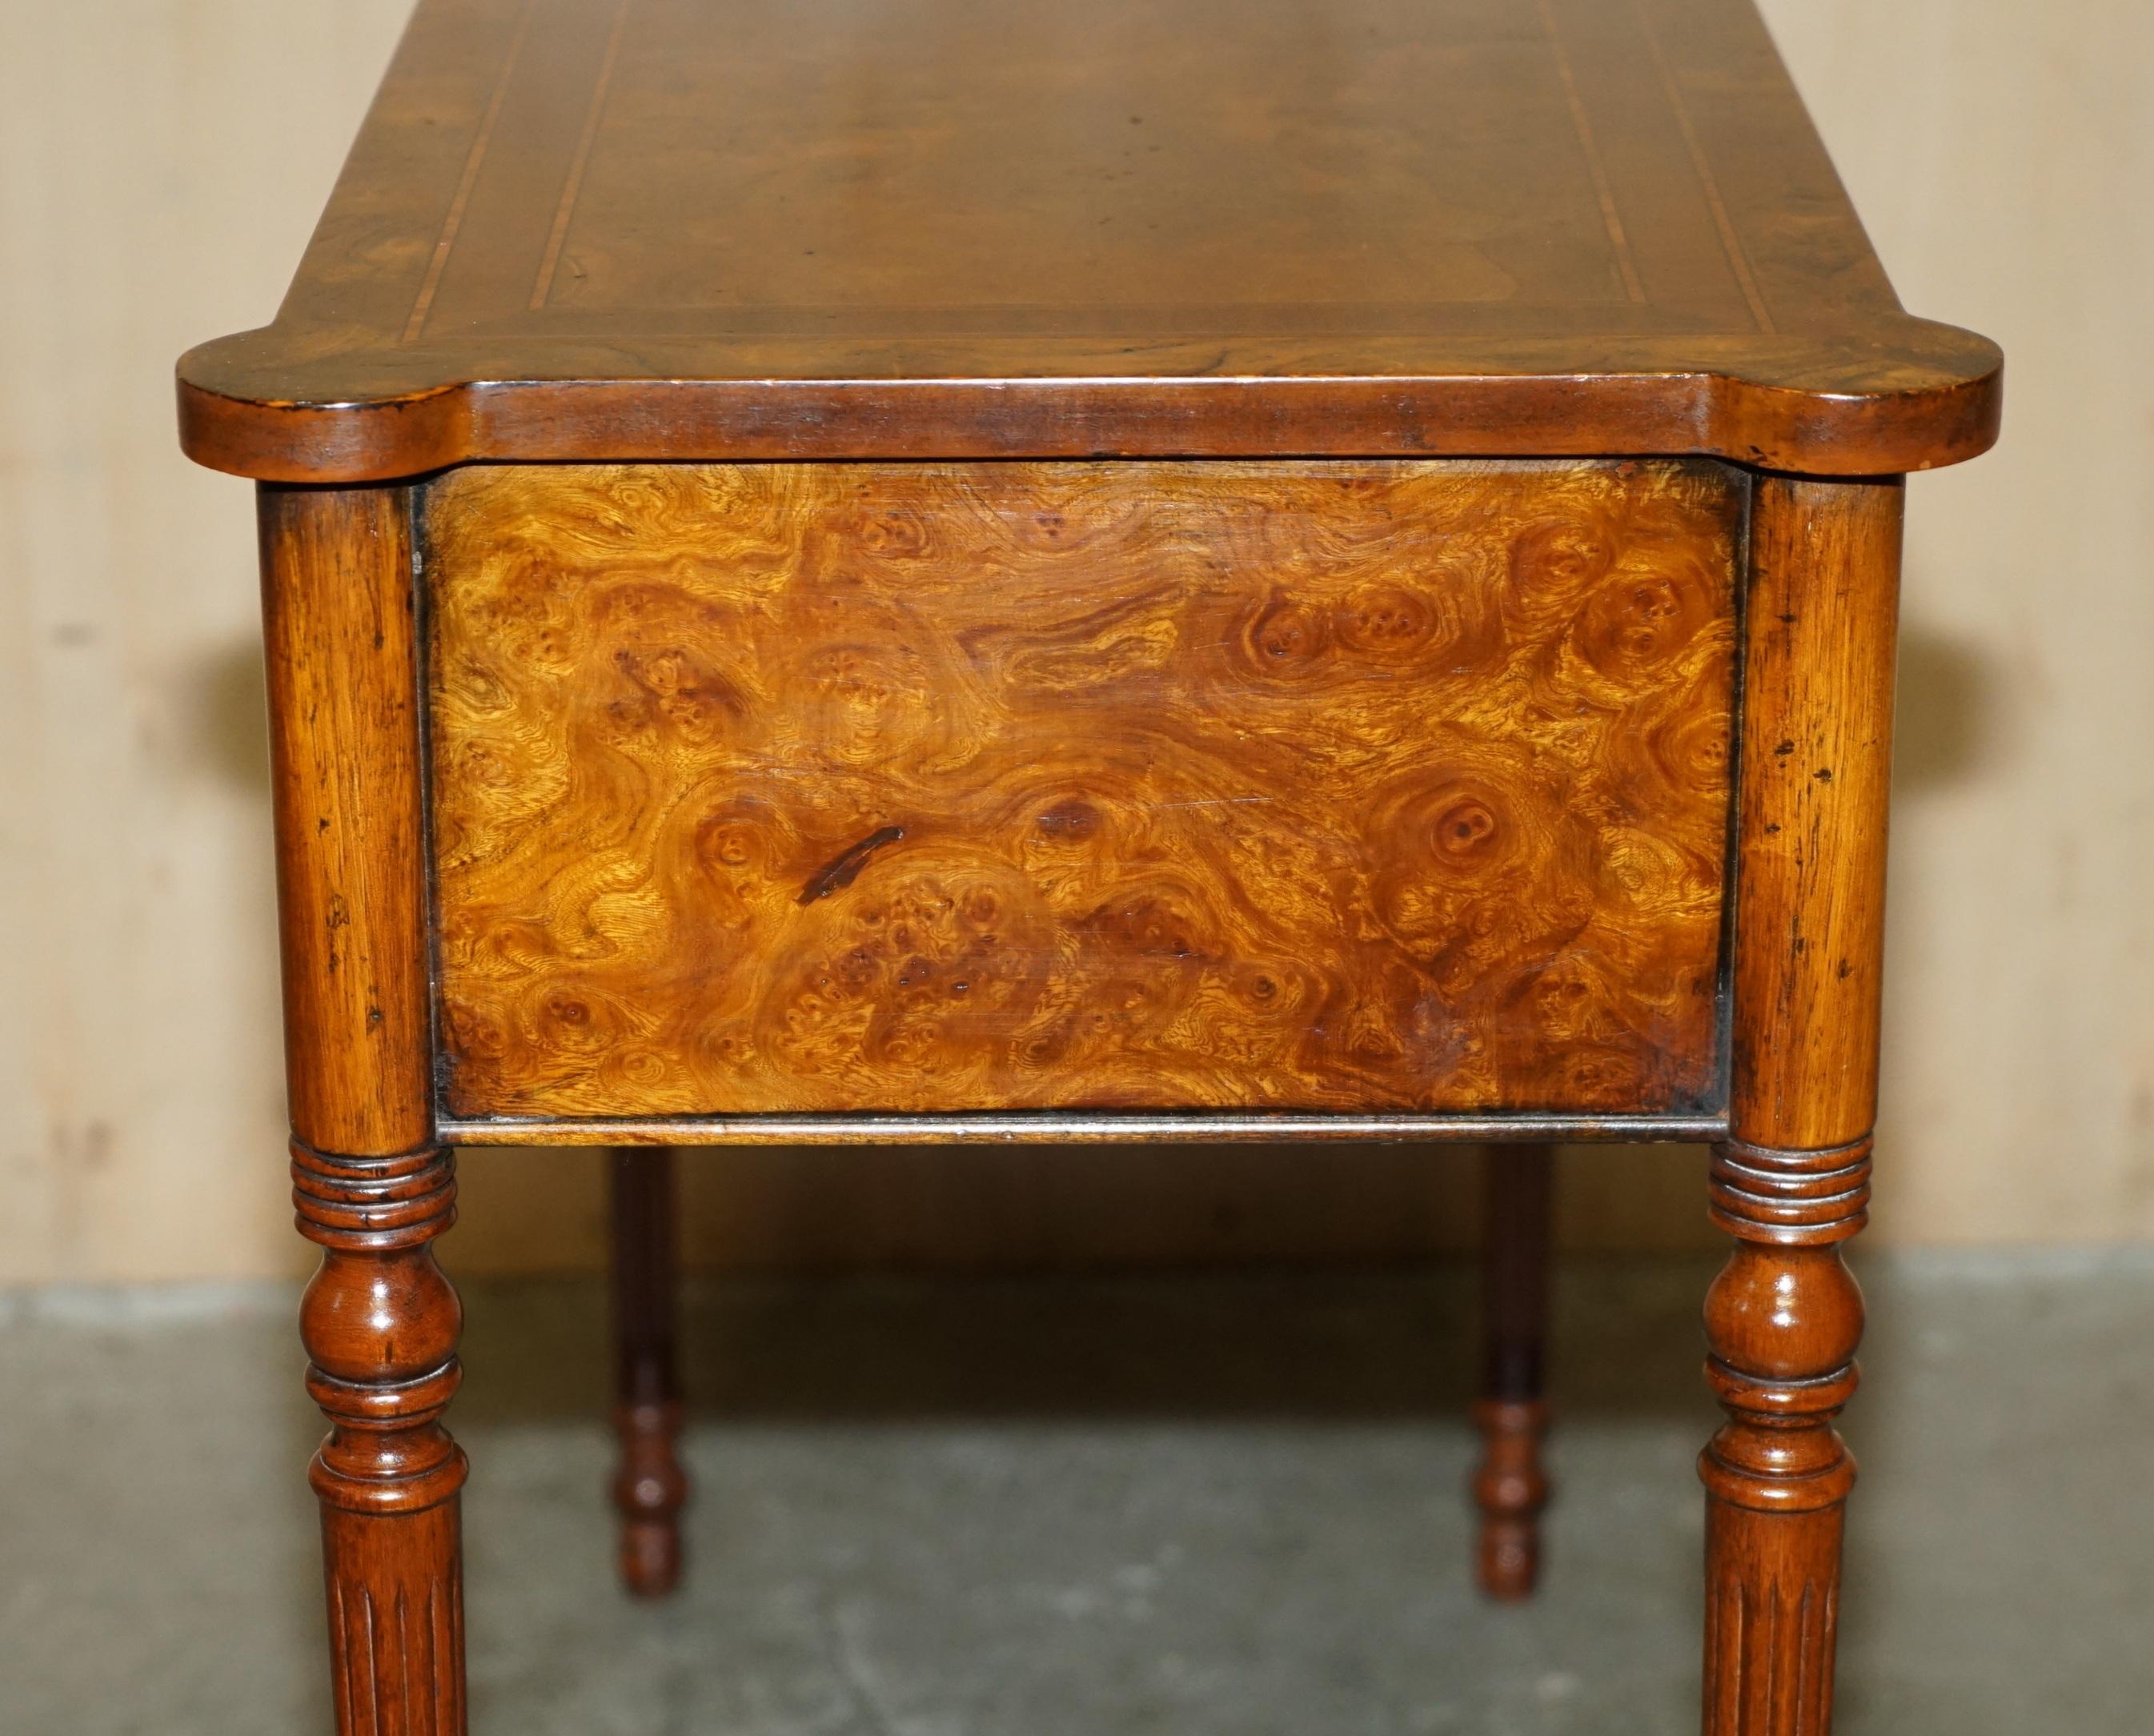 EXQUISITE CIRCA 1920 BURR ELM & SATiNWOOD FRENCH POLISHED RESTORED CONSOLE TABLE For Sale 7